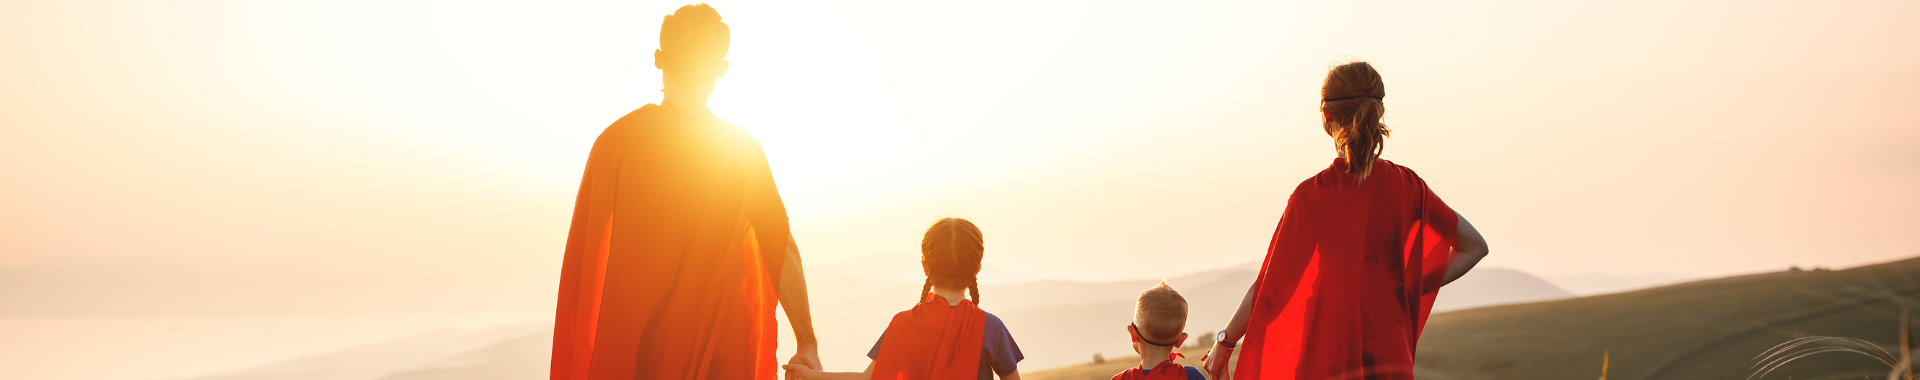 image of dad, two kids, and mom in superhero costumes with their back to the camera looking at the sunset